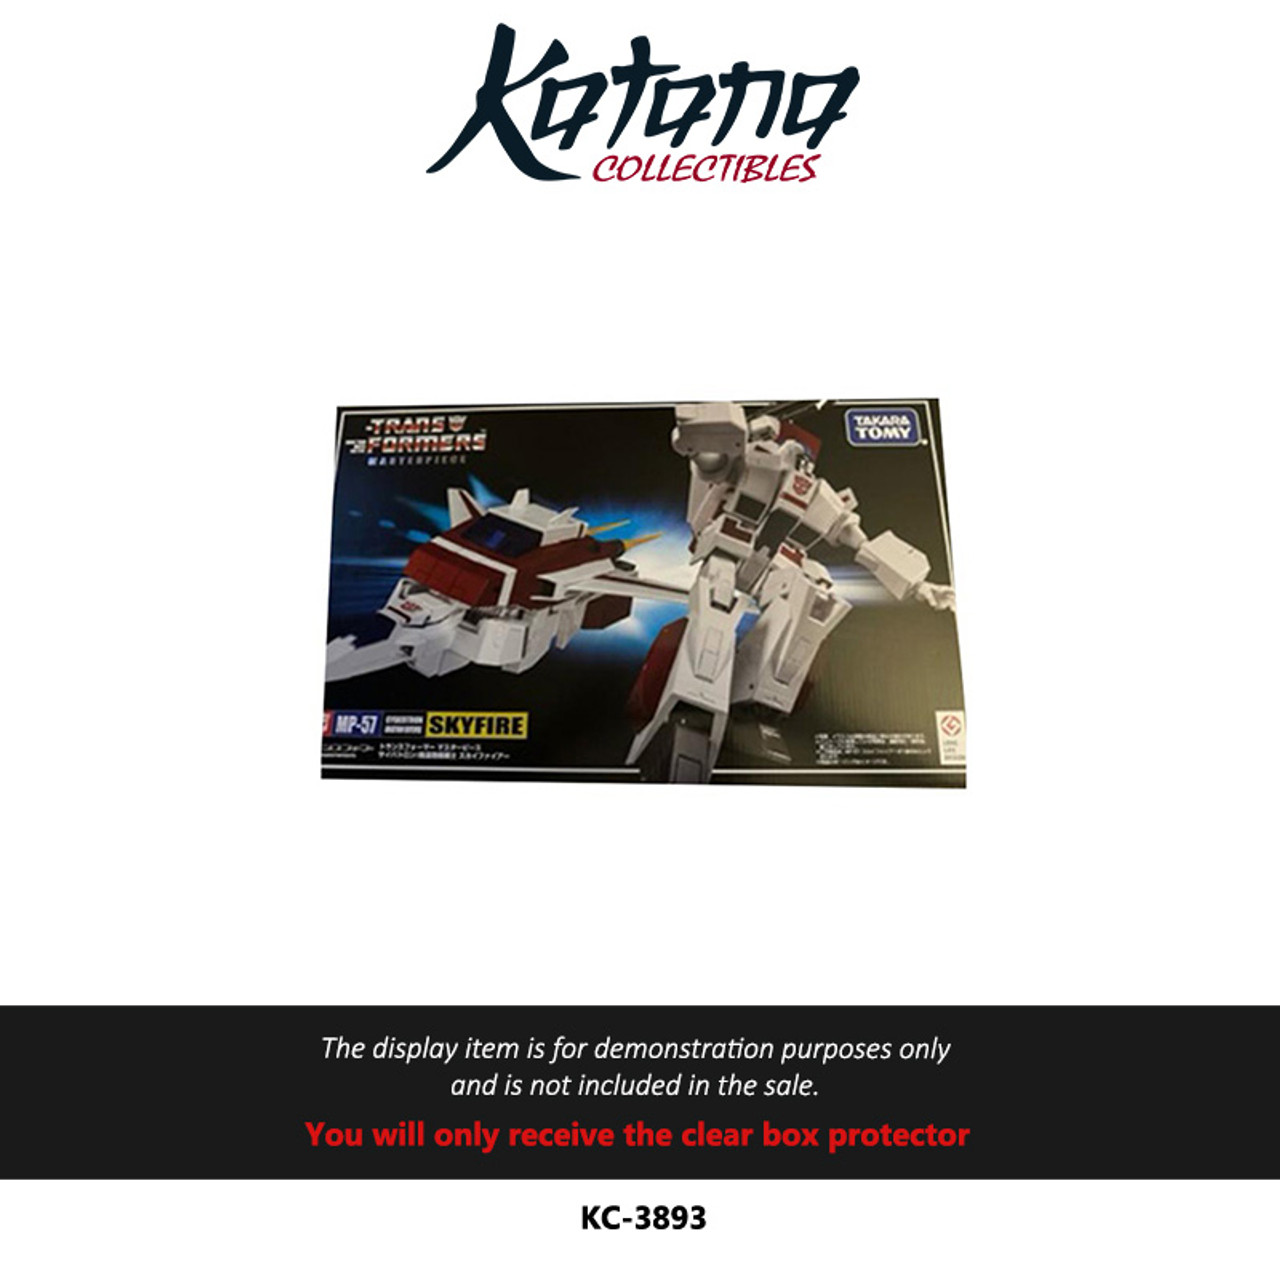 Katana Collectibles Protector For Transformers Masterpiece skyfire